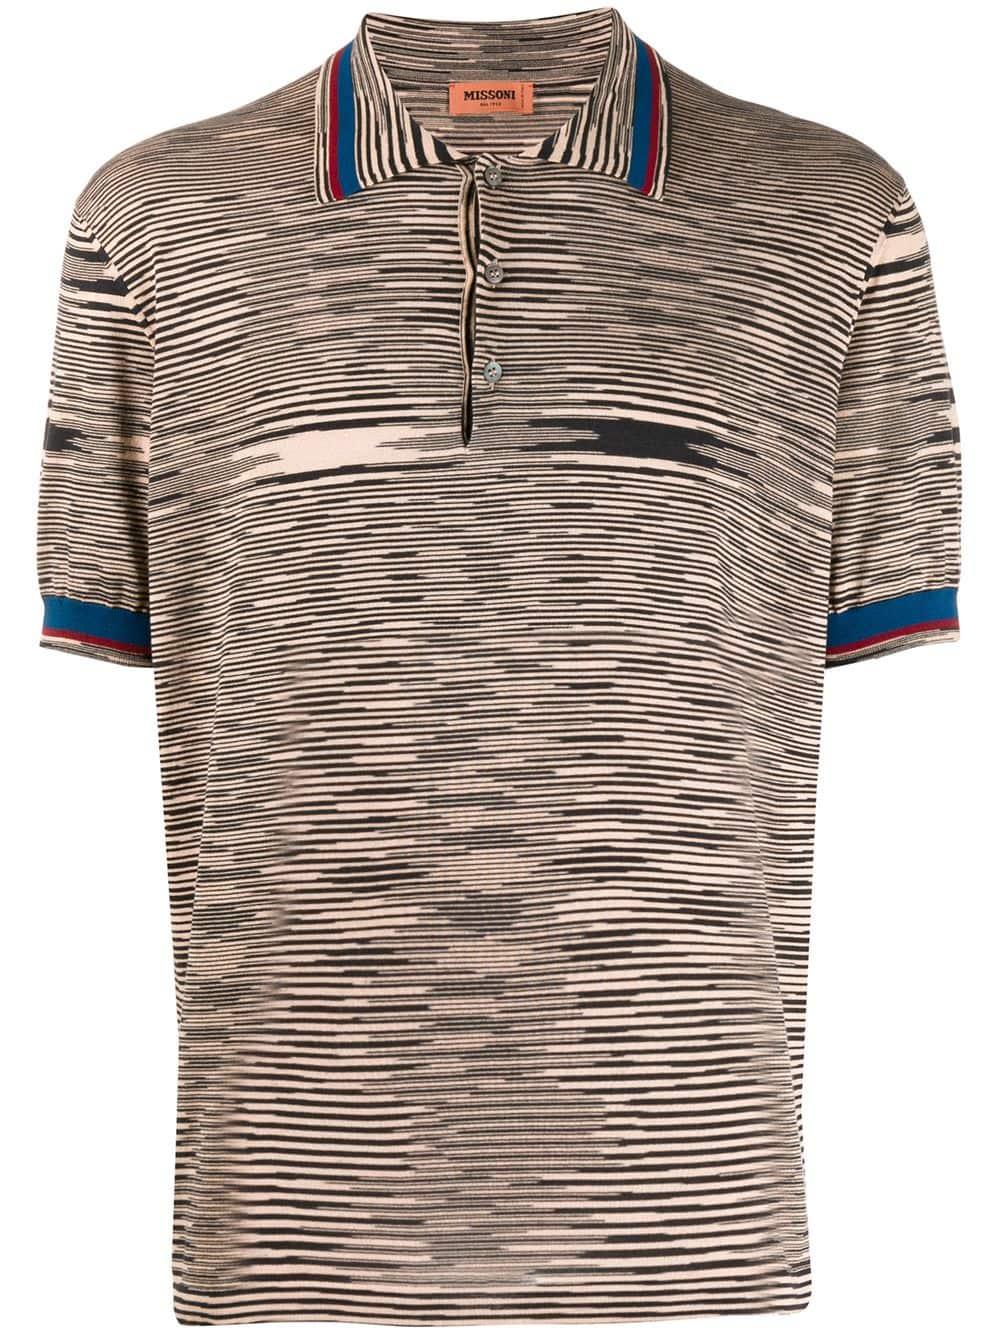 Missoni Striped Polo Shirt in Brown for Men - Lyst